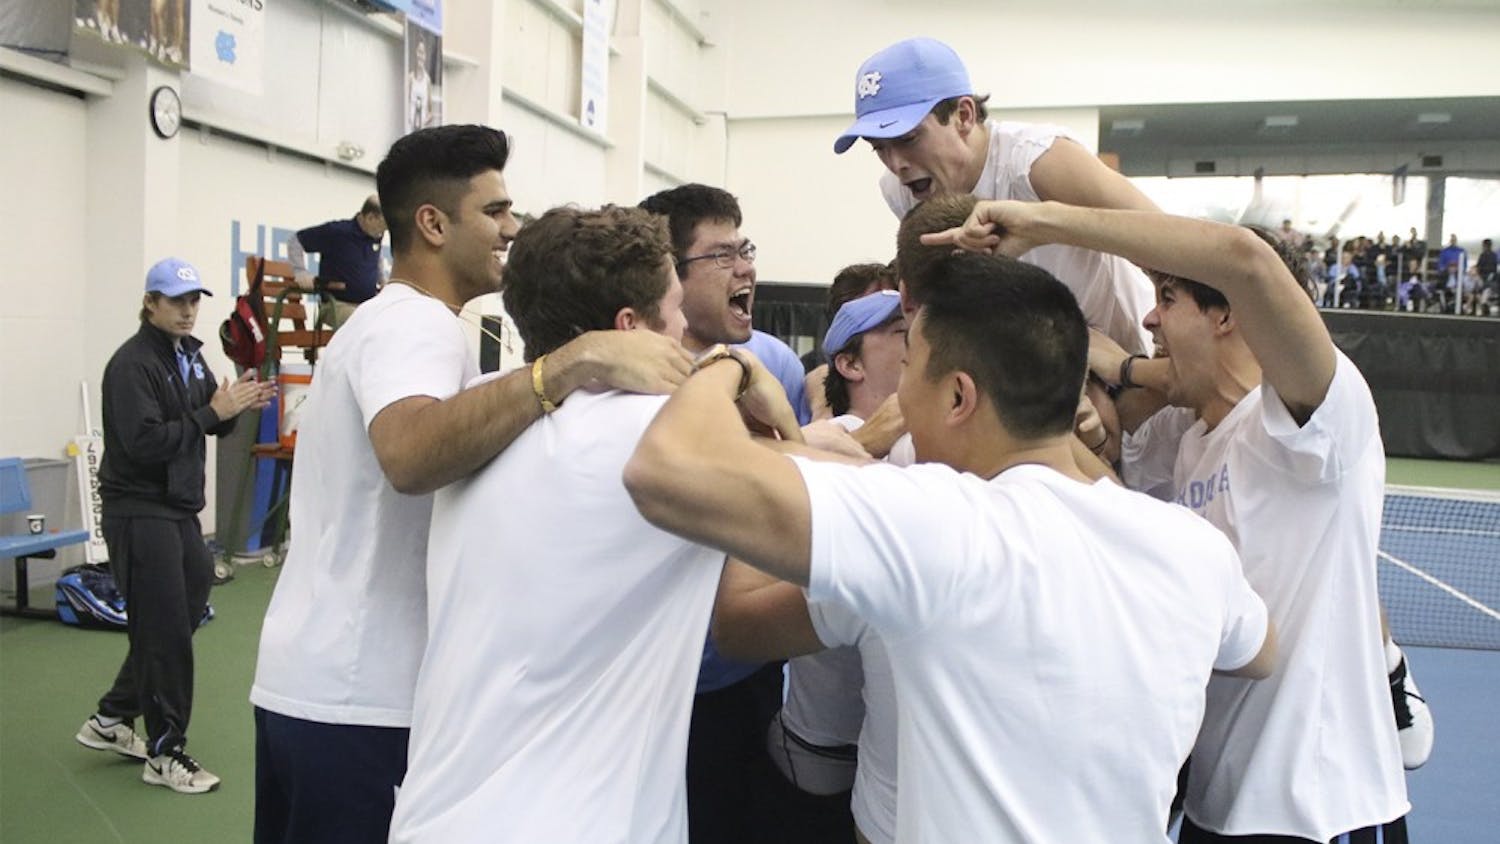 No. 7 UNC Men's Tennis team mobs senior Brett Clark after he won his match in three sets to secure the team's victory over No.5 Oklahoma 4-3 Sunday afternoon.